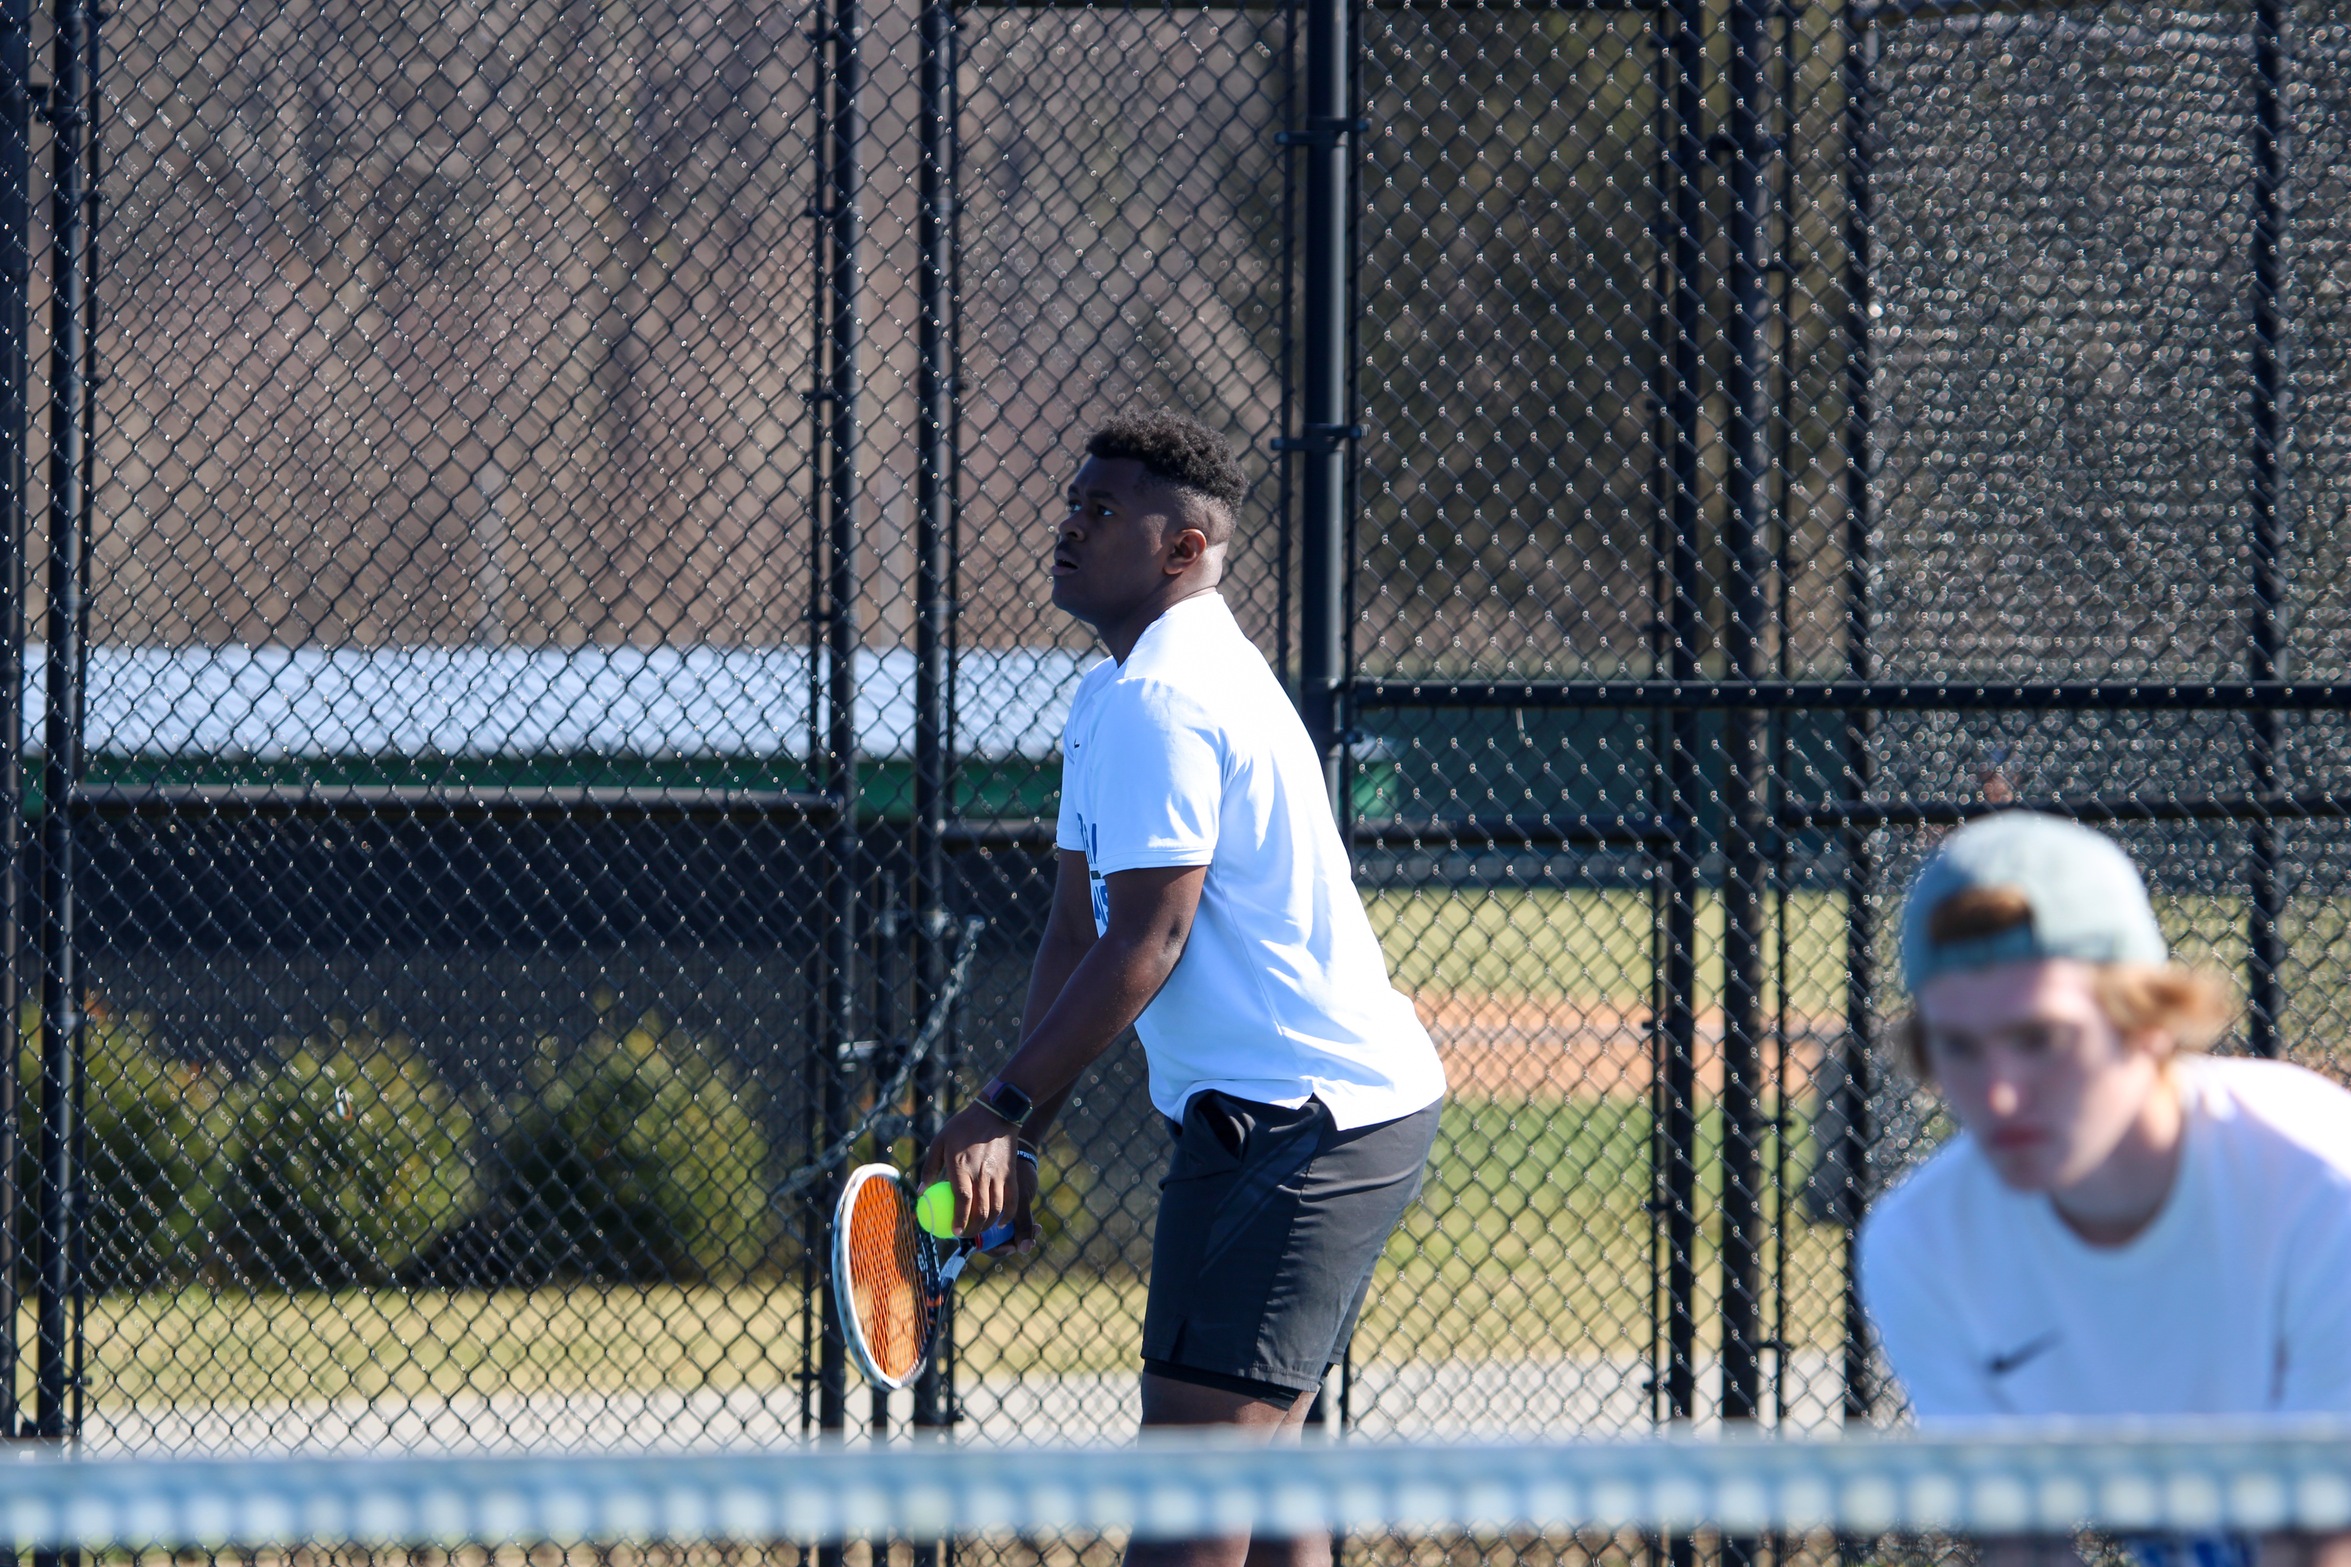 JaMarcus Walker serving up a ball at the McCoy Tennis Complex (Photo courtesy of Brianna Rodibaugh '24).